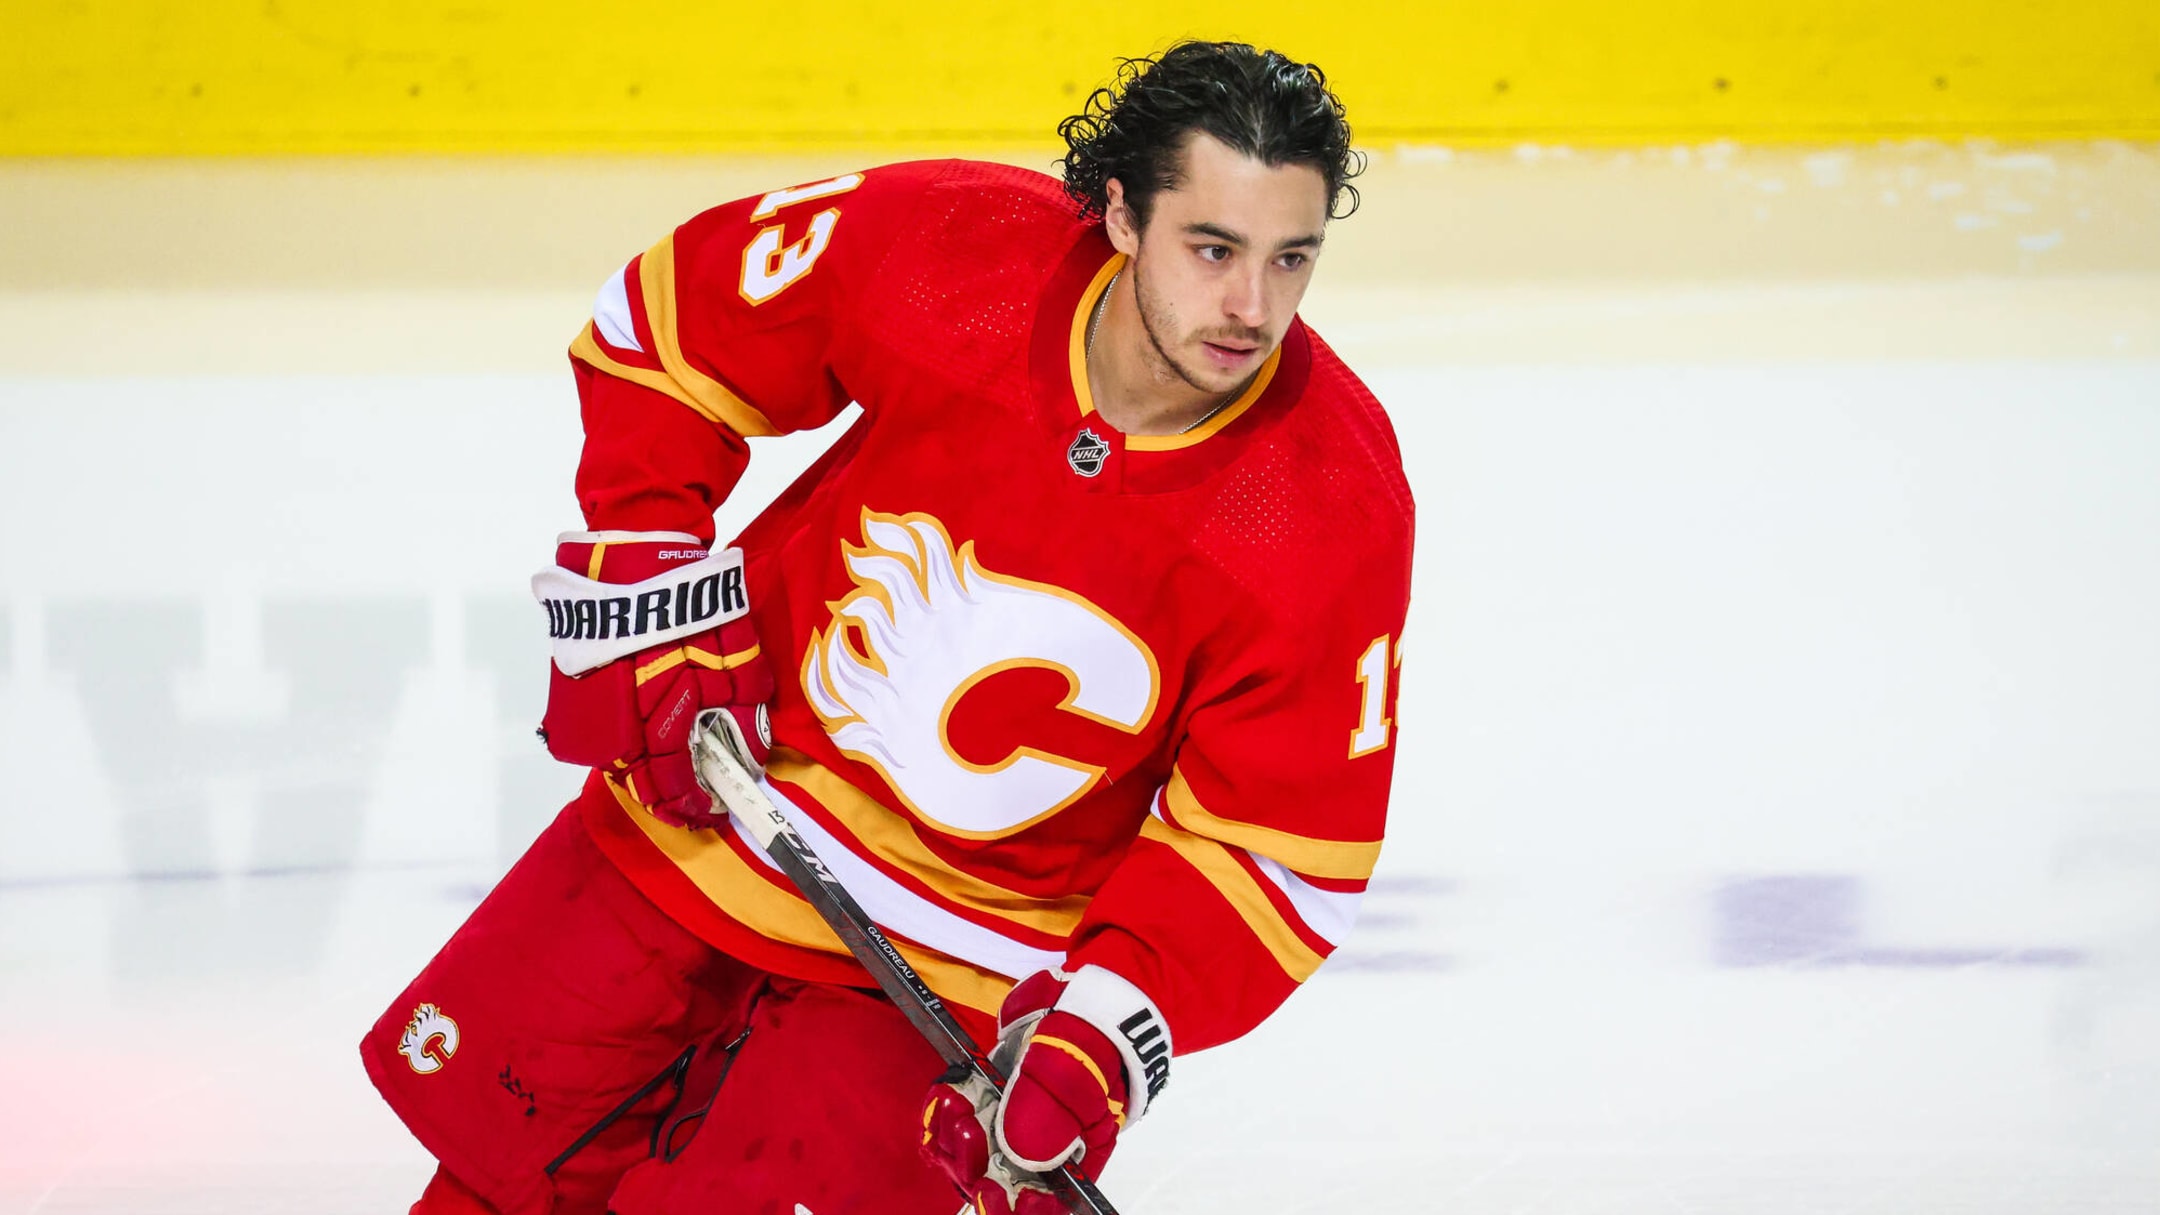 Mangiapane agrees to one-year deal with Flames